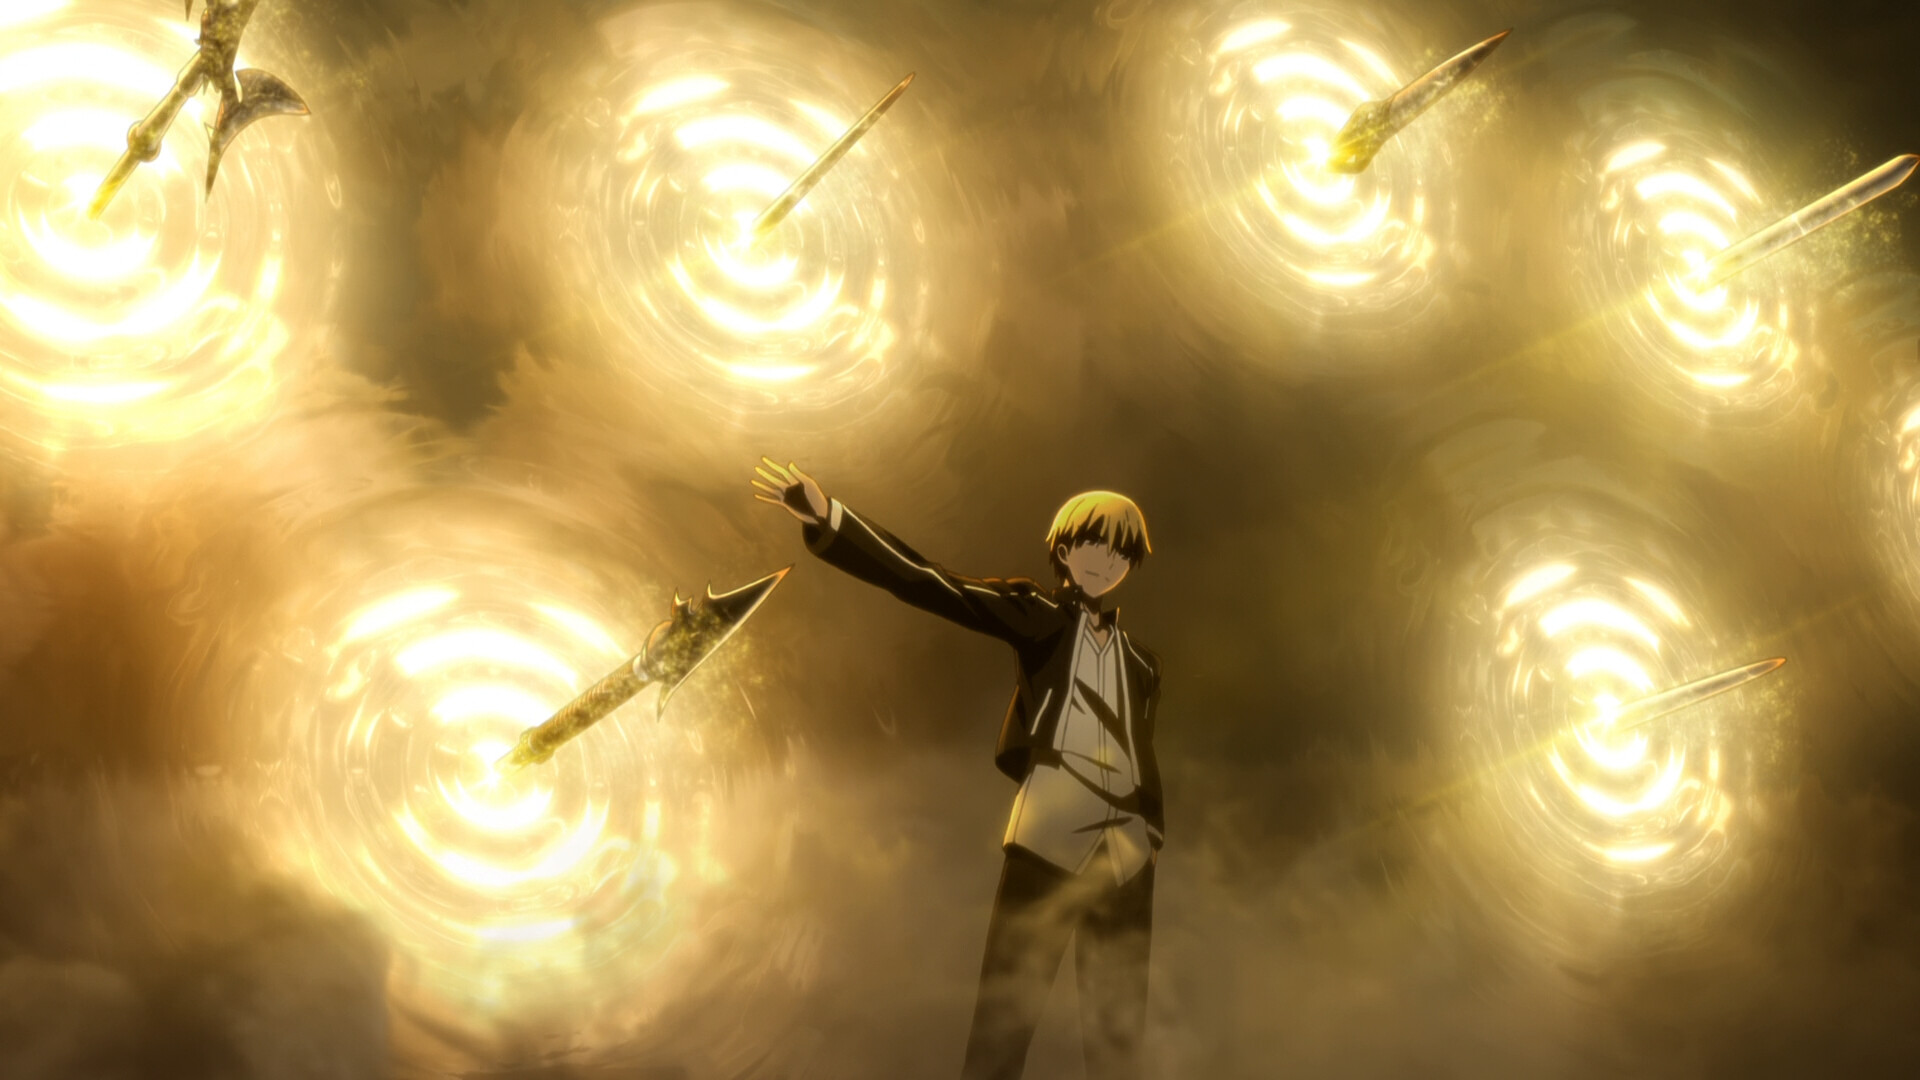 Gilgamesh (Fate/Zero): Noble Phantasms, The armaments carried by Heroic Spirits, made from humanity's illusions. 1920x1080 Full HD Wallpaper.